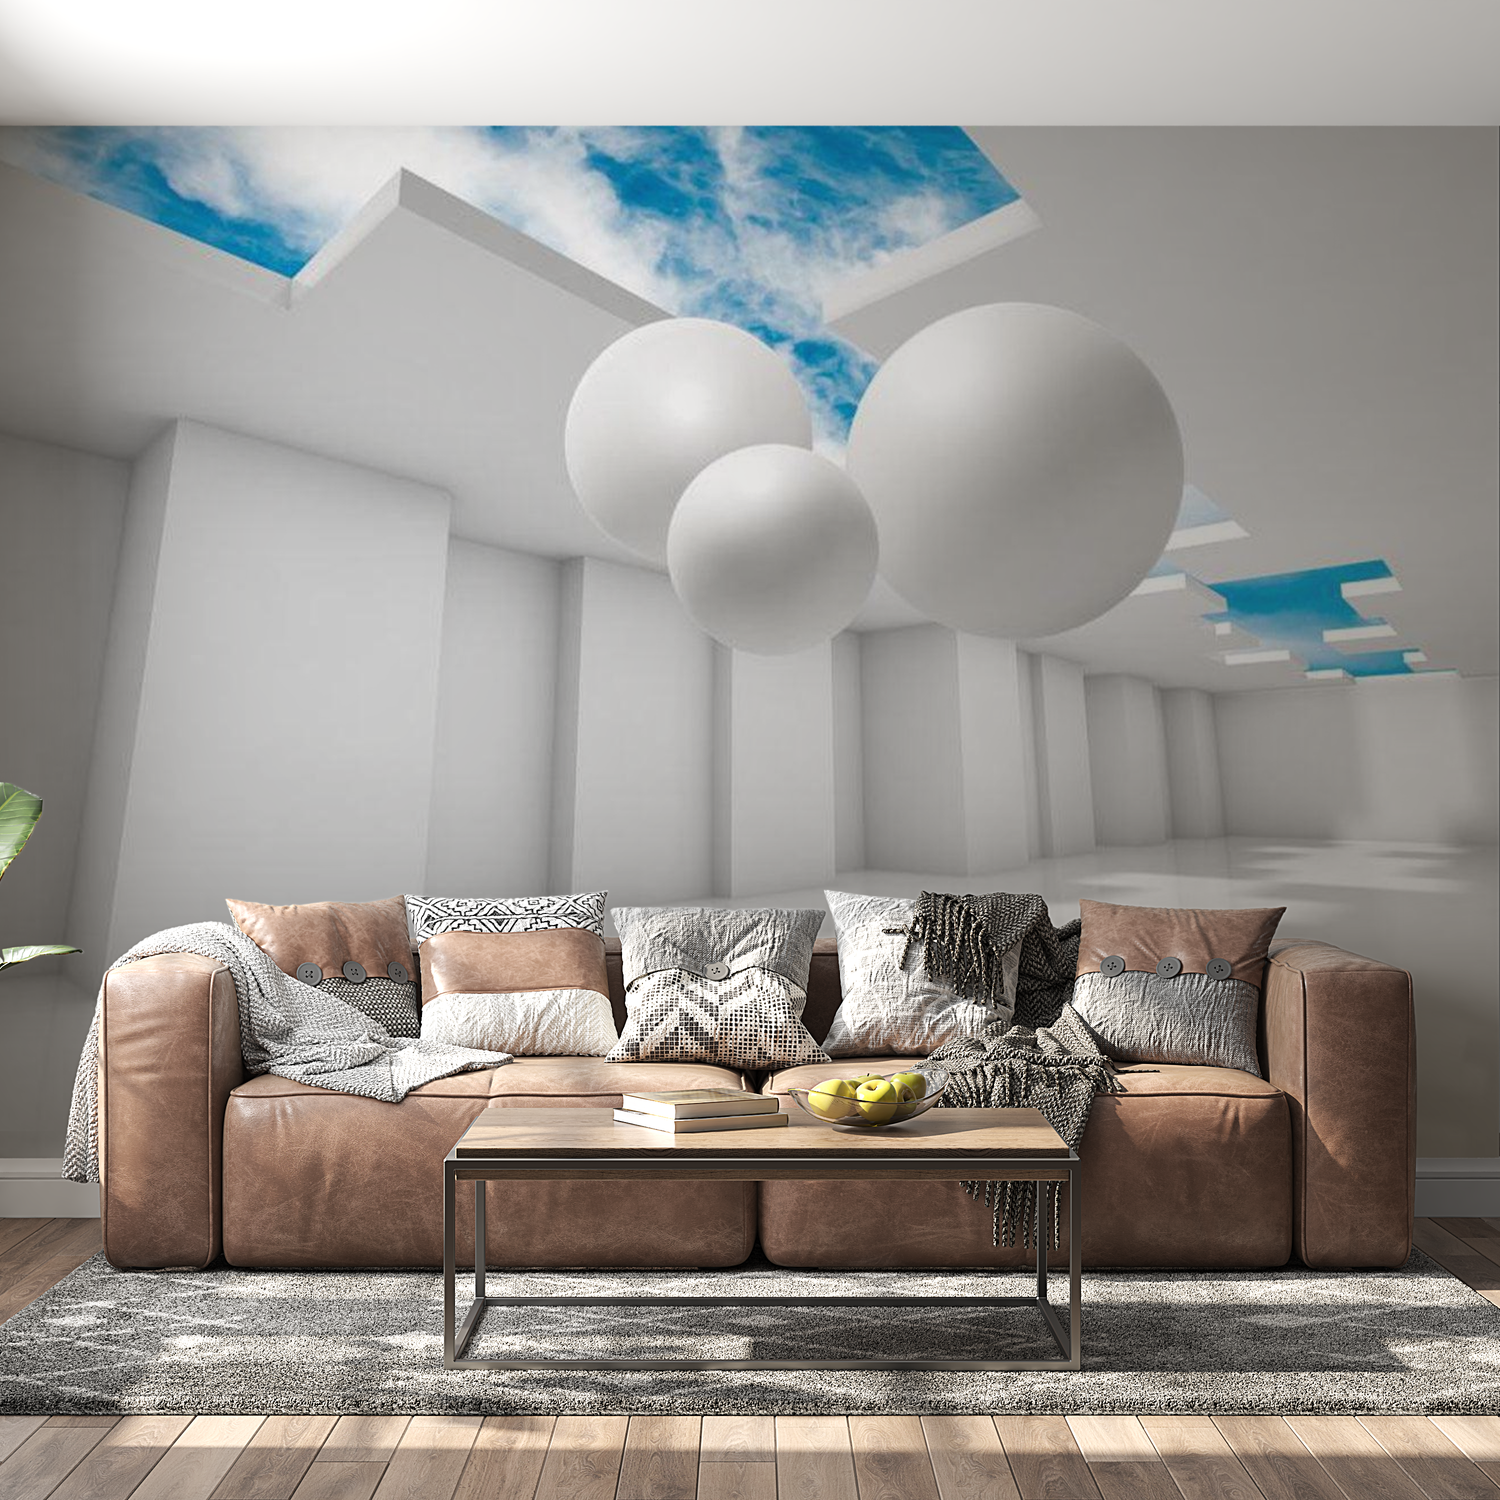 3D Illusion Wallpaper Wall Mural - Architecture Of The Future 39"Wx27"H